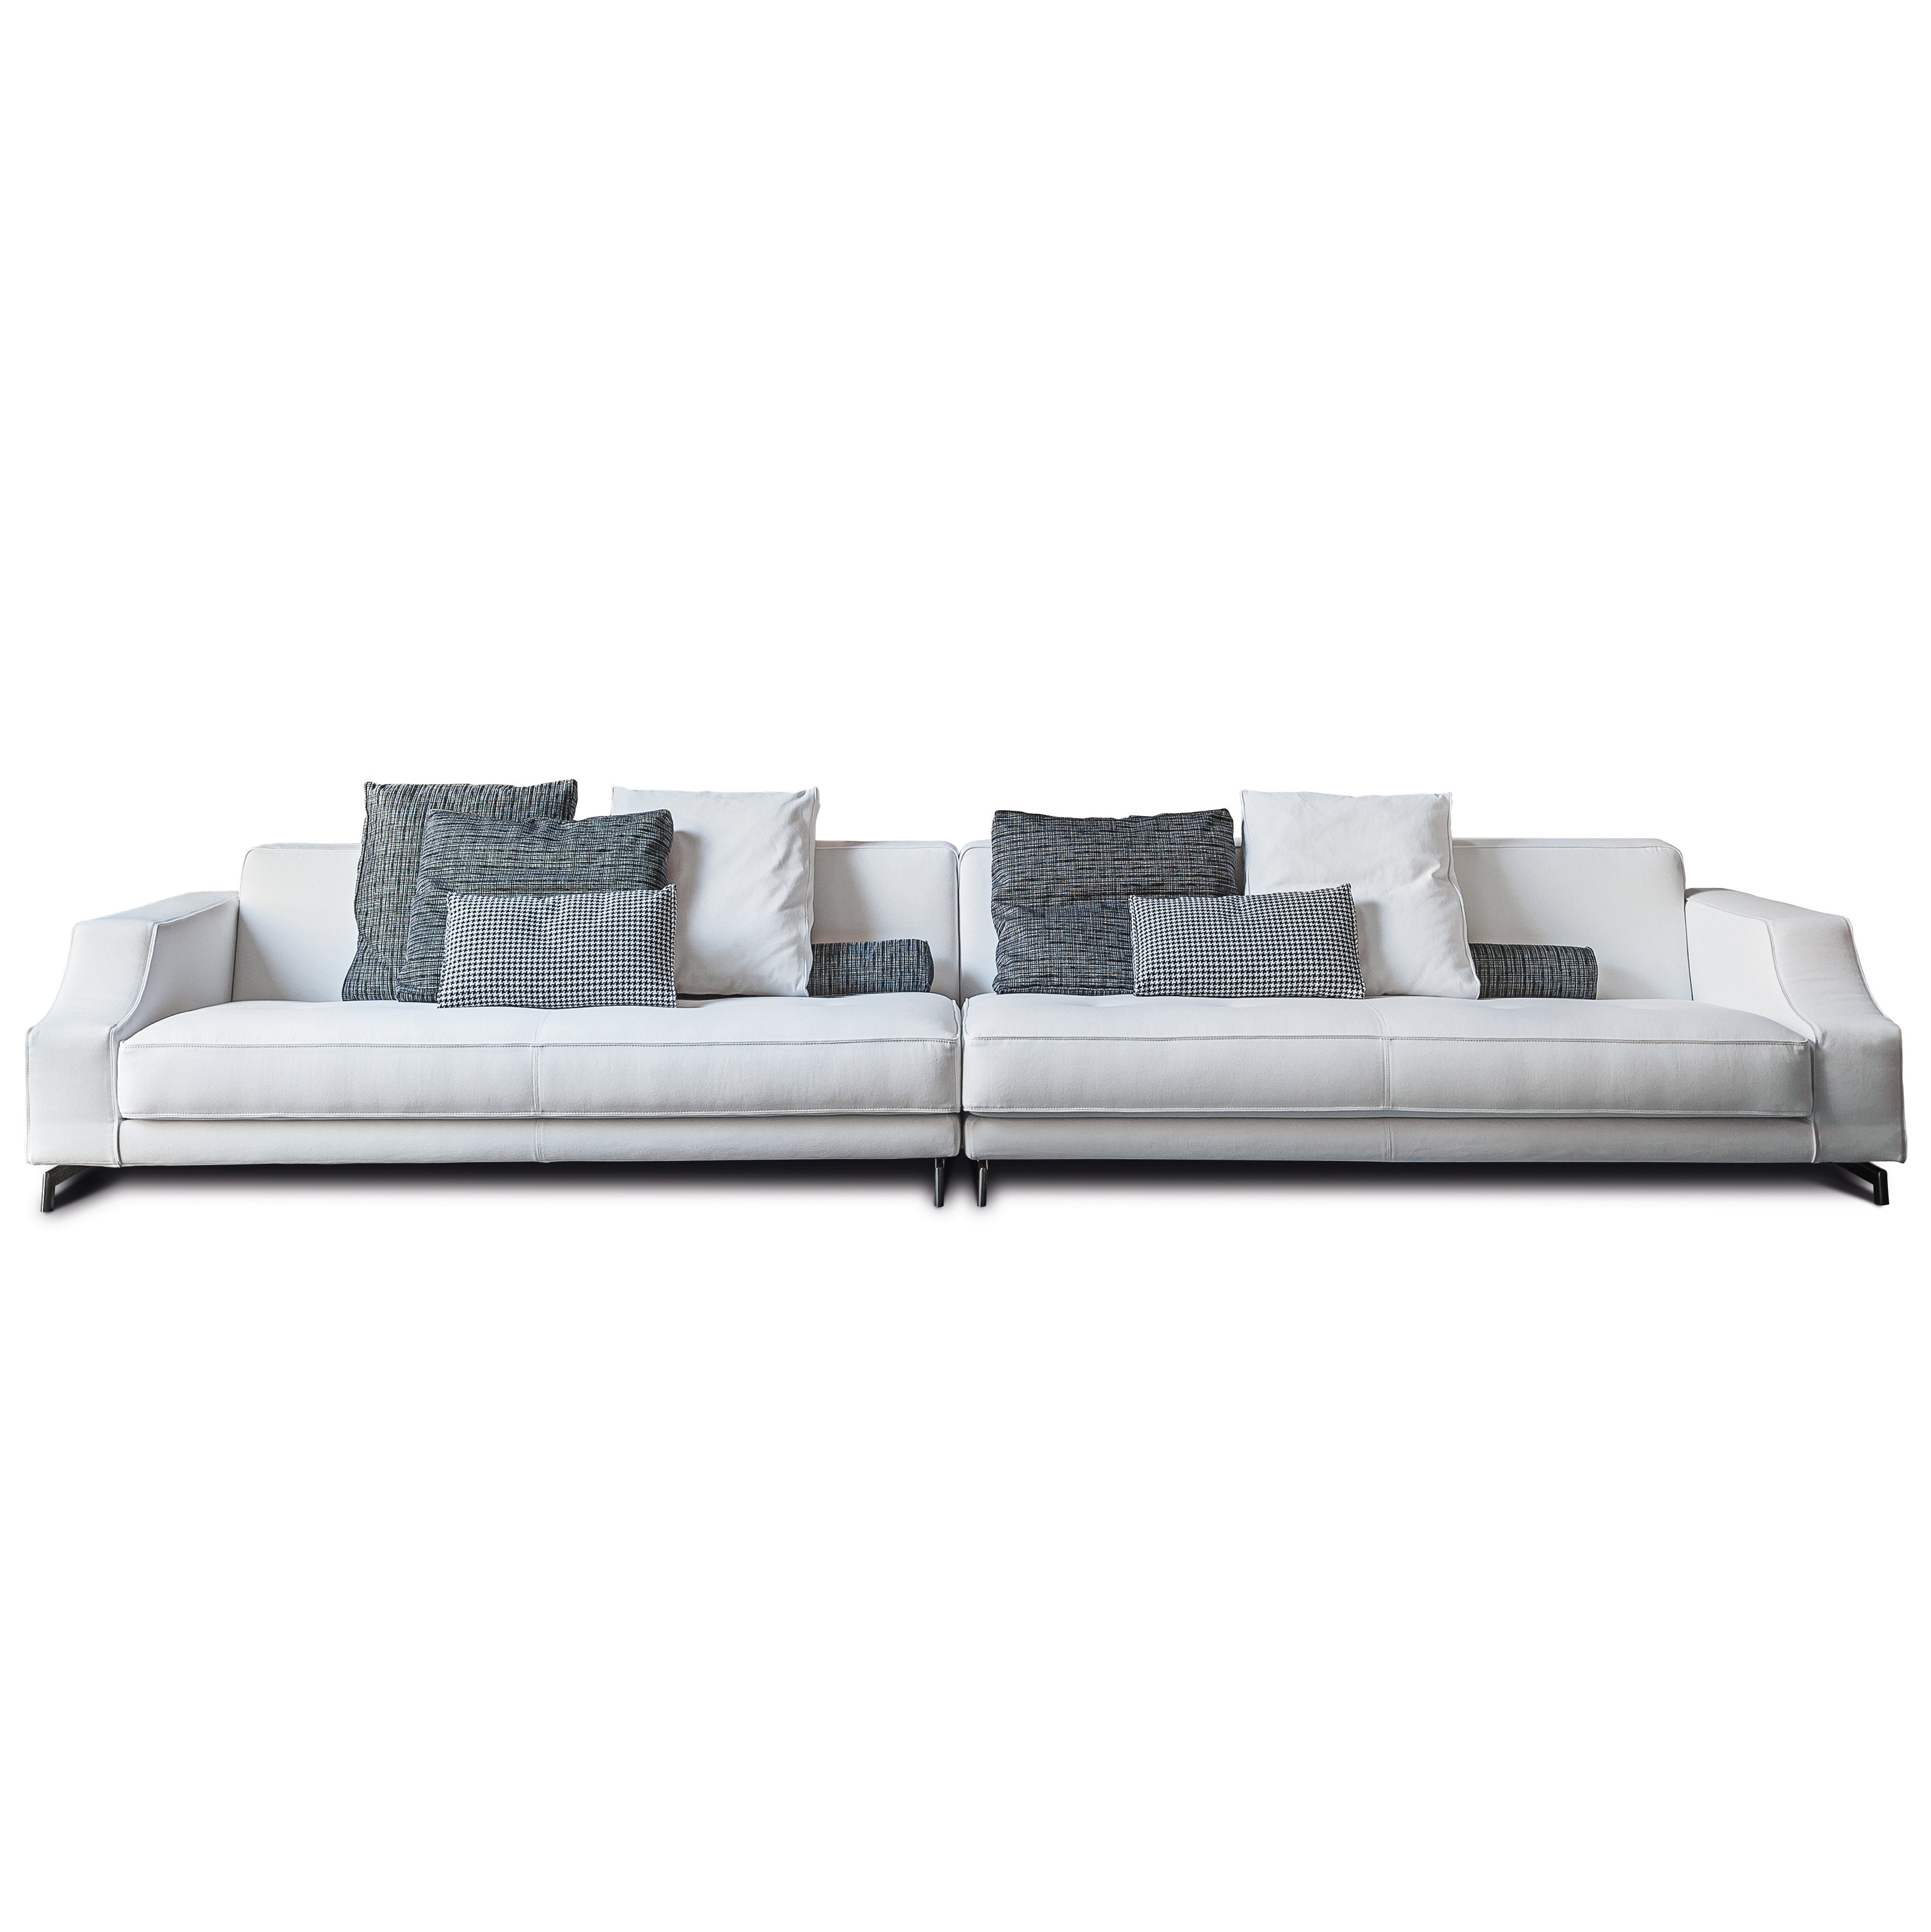 310 Identity 4-Seater Sectional Sofa